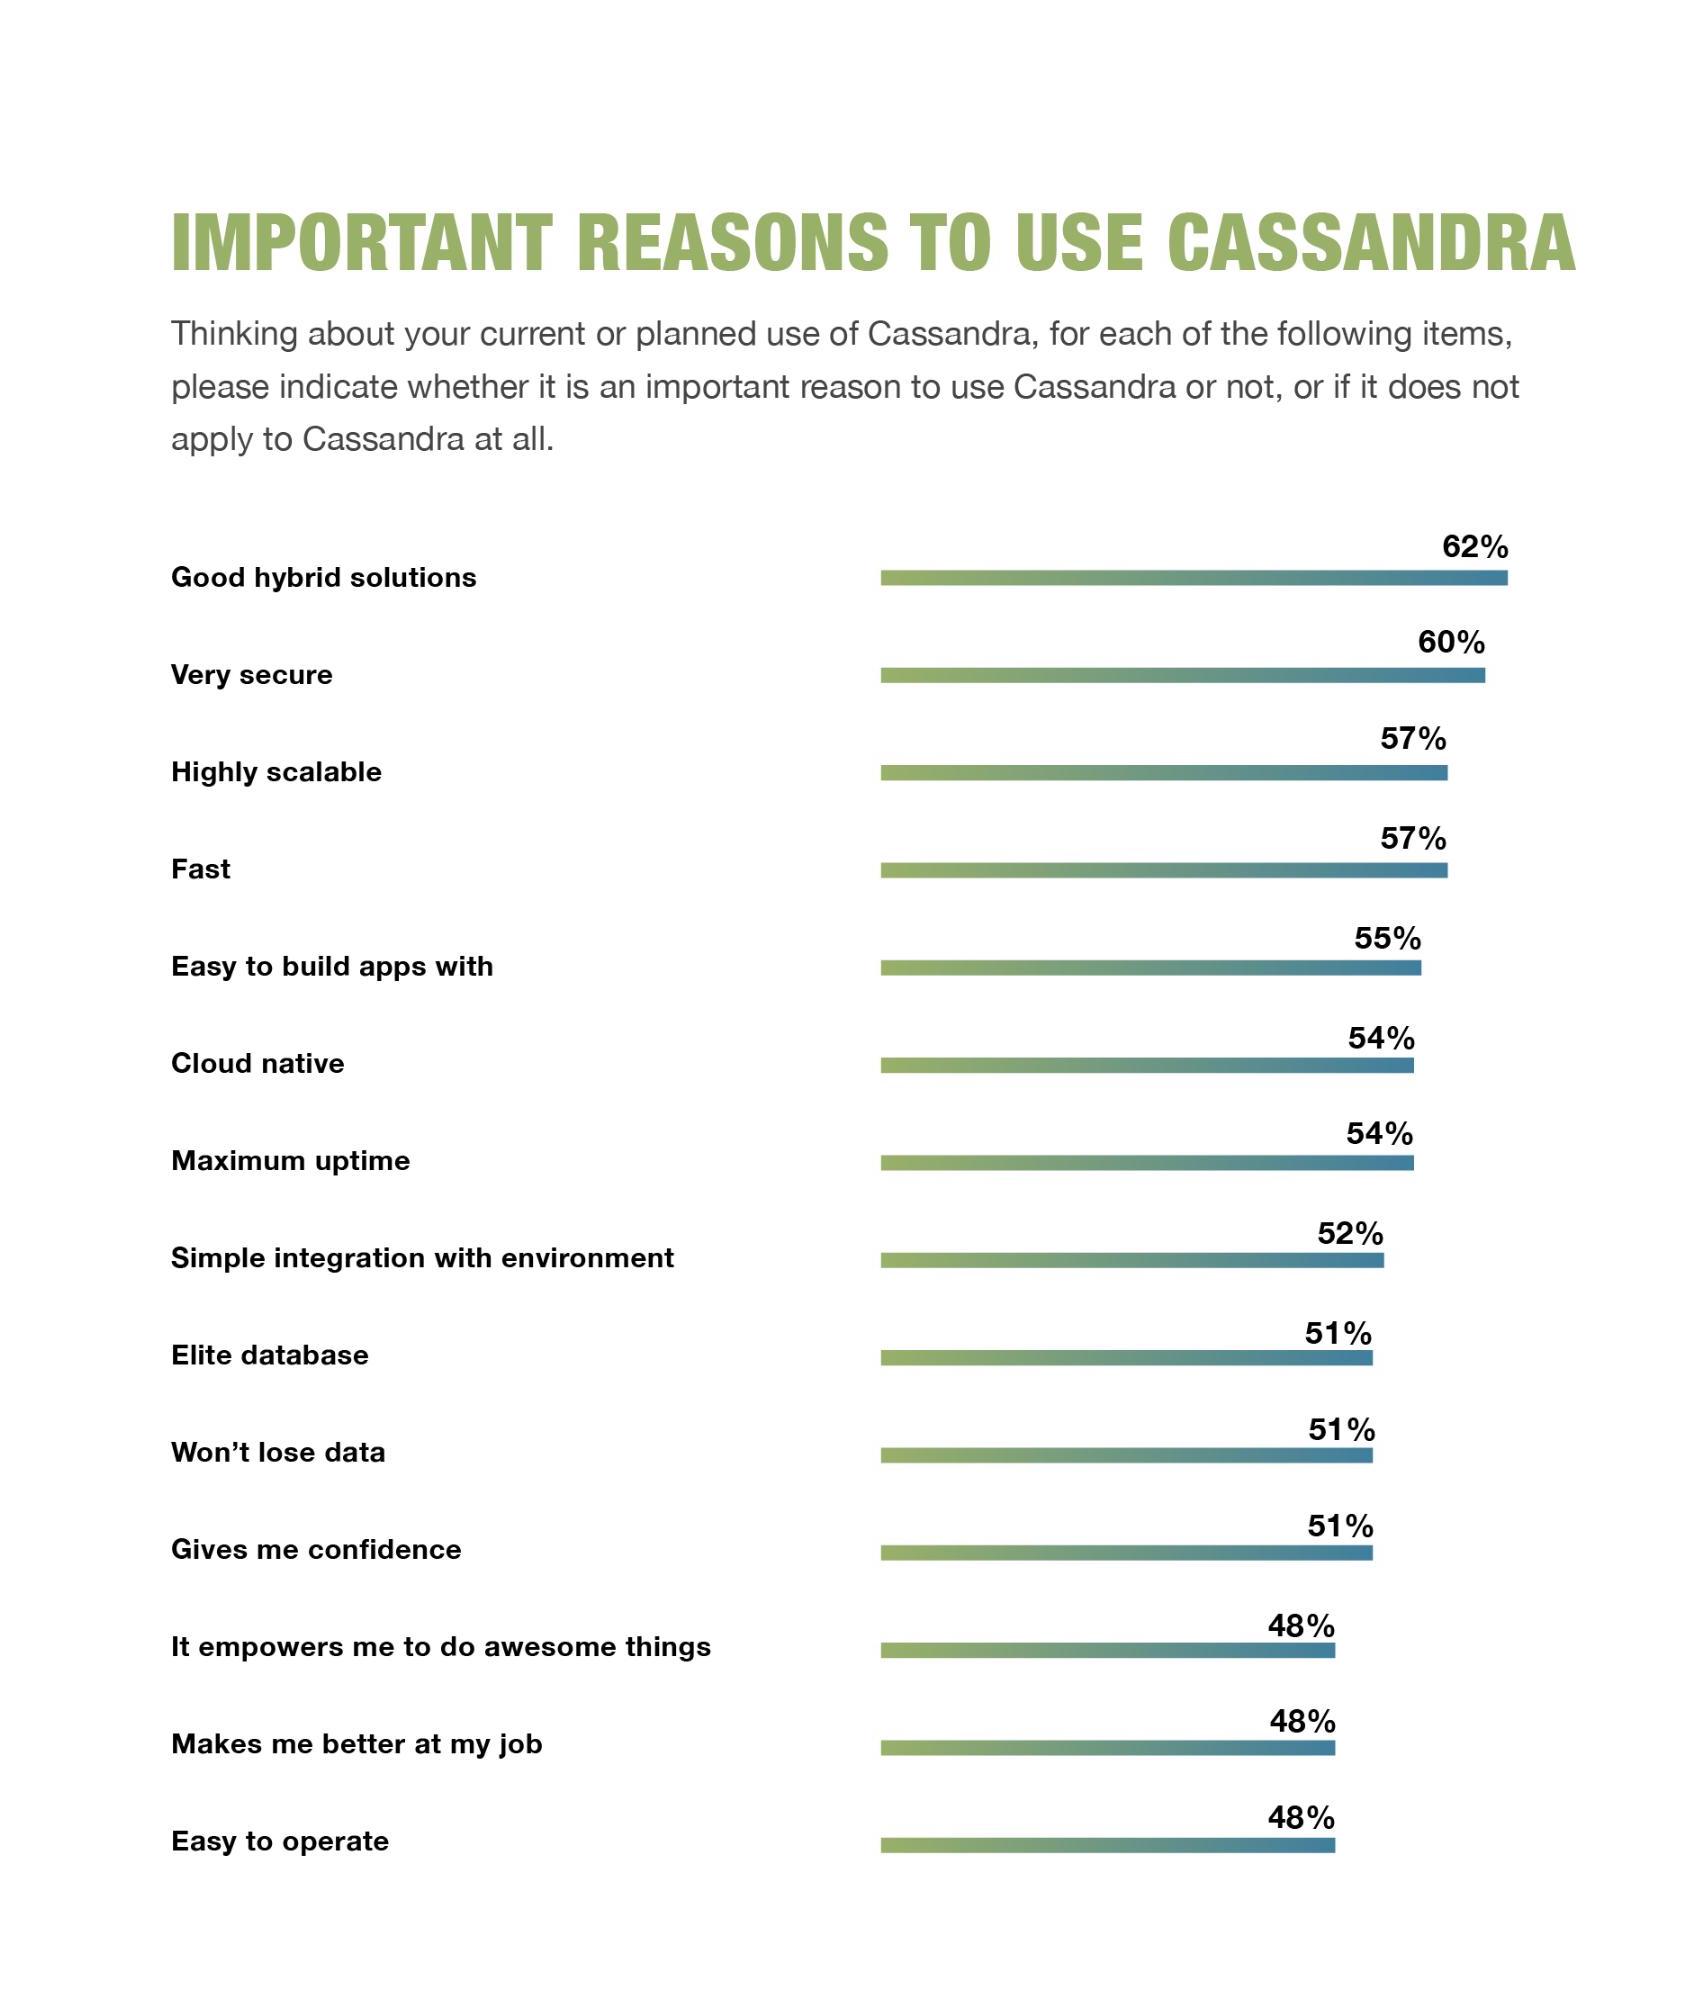 Top reasons practitioners use Cassandra